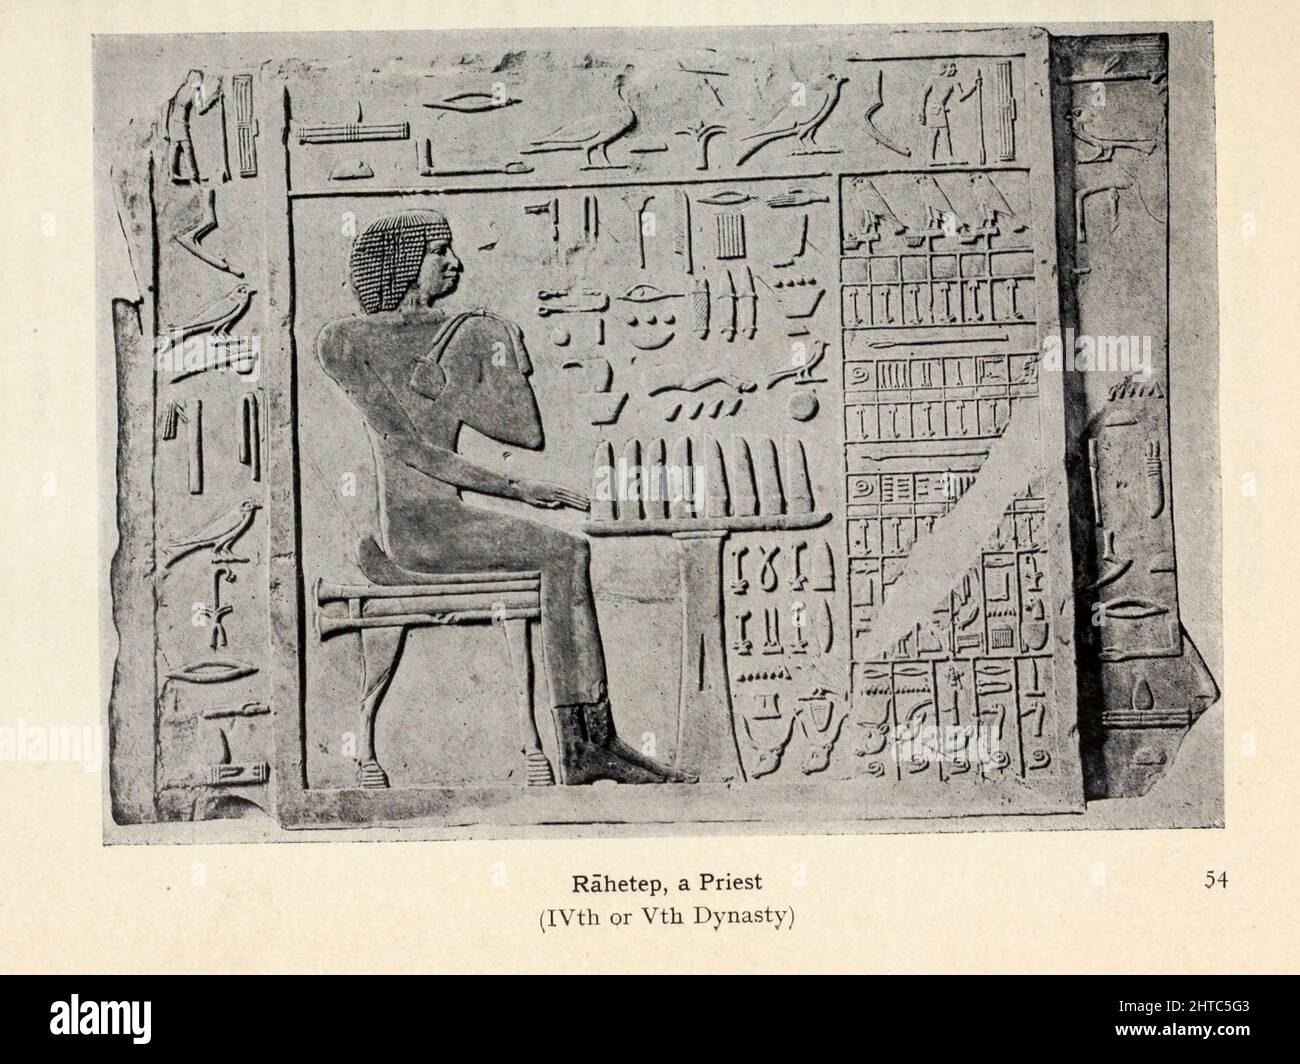 Rahetep, a Priest IVth or Vth Dynasty From the book '  Myths and legends : ancient Egypt ' by Lewis Spence, Published Boston : D.D. Nickerson 1910 Stock Photo